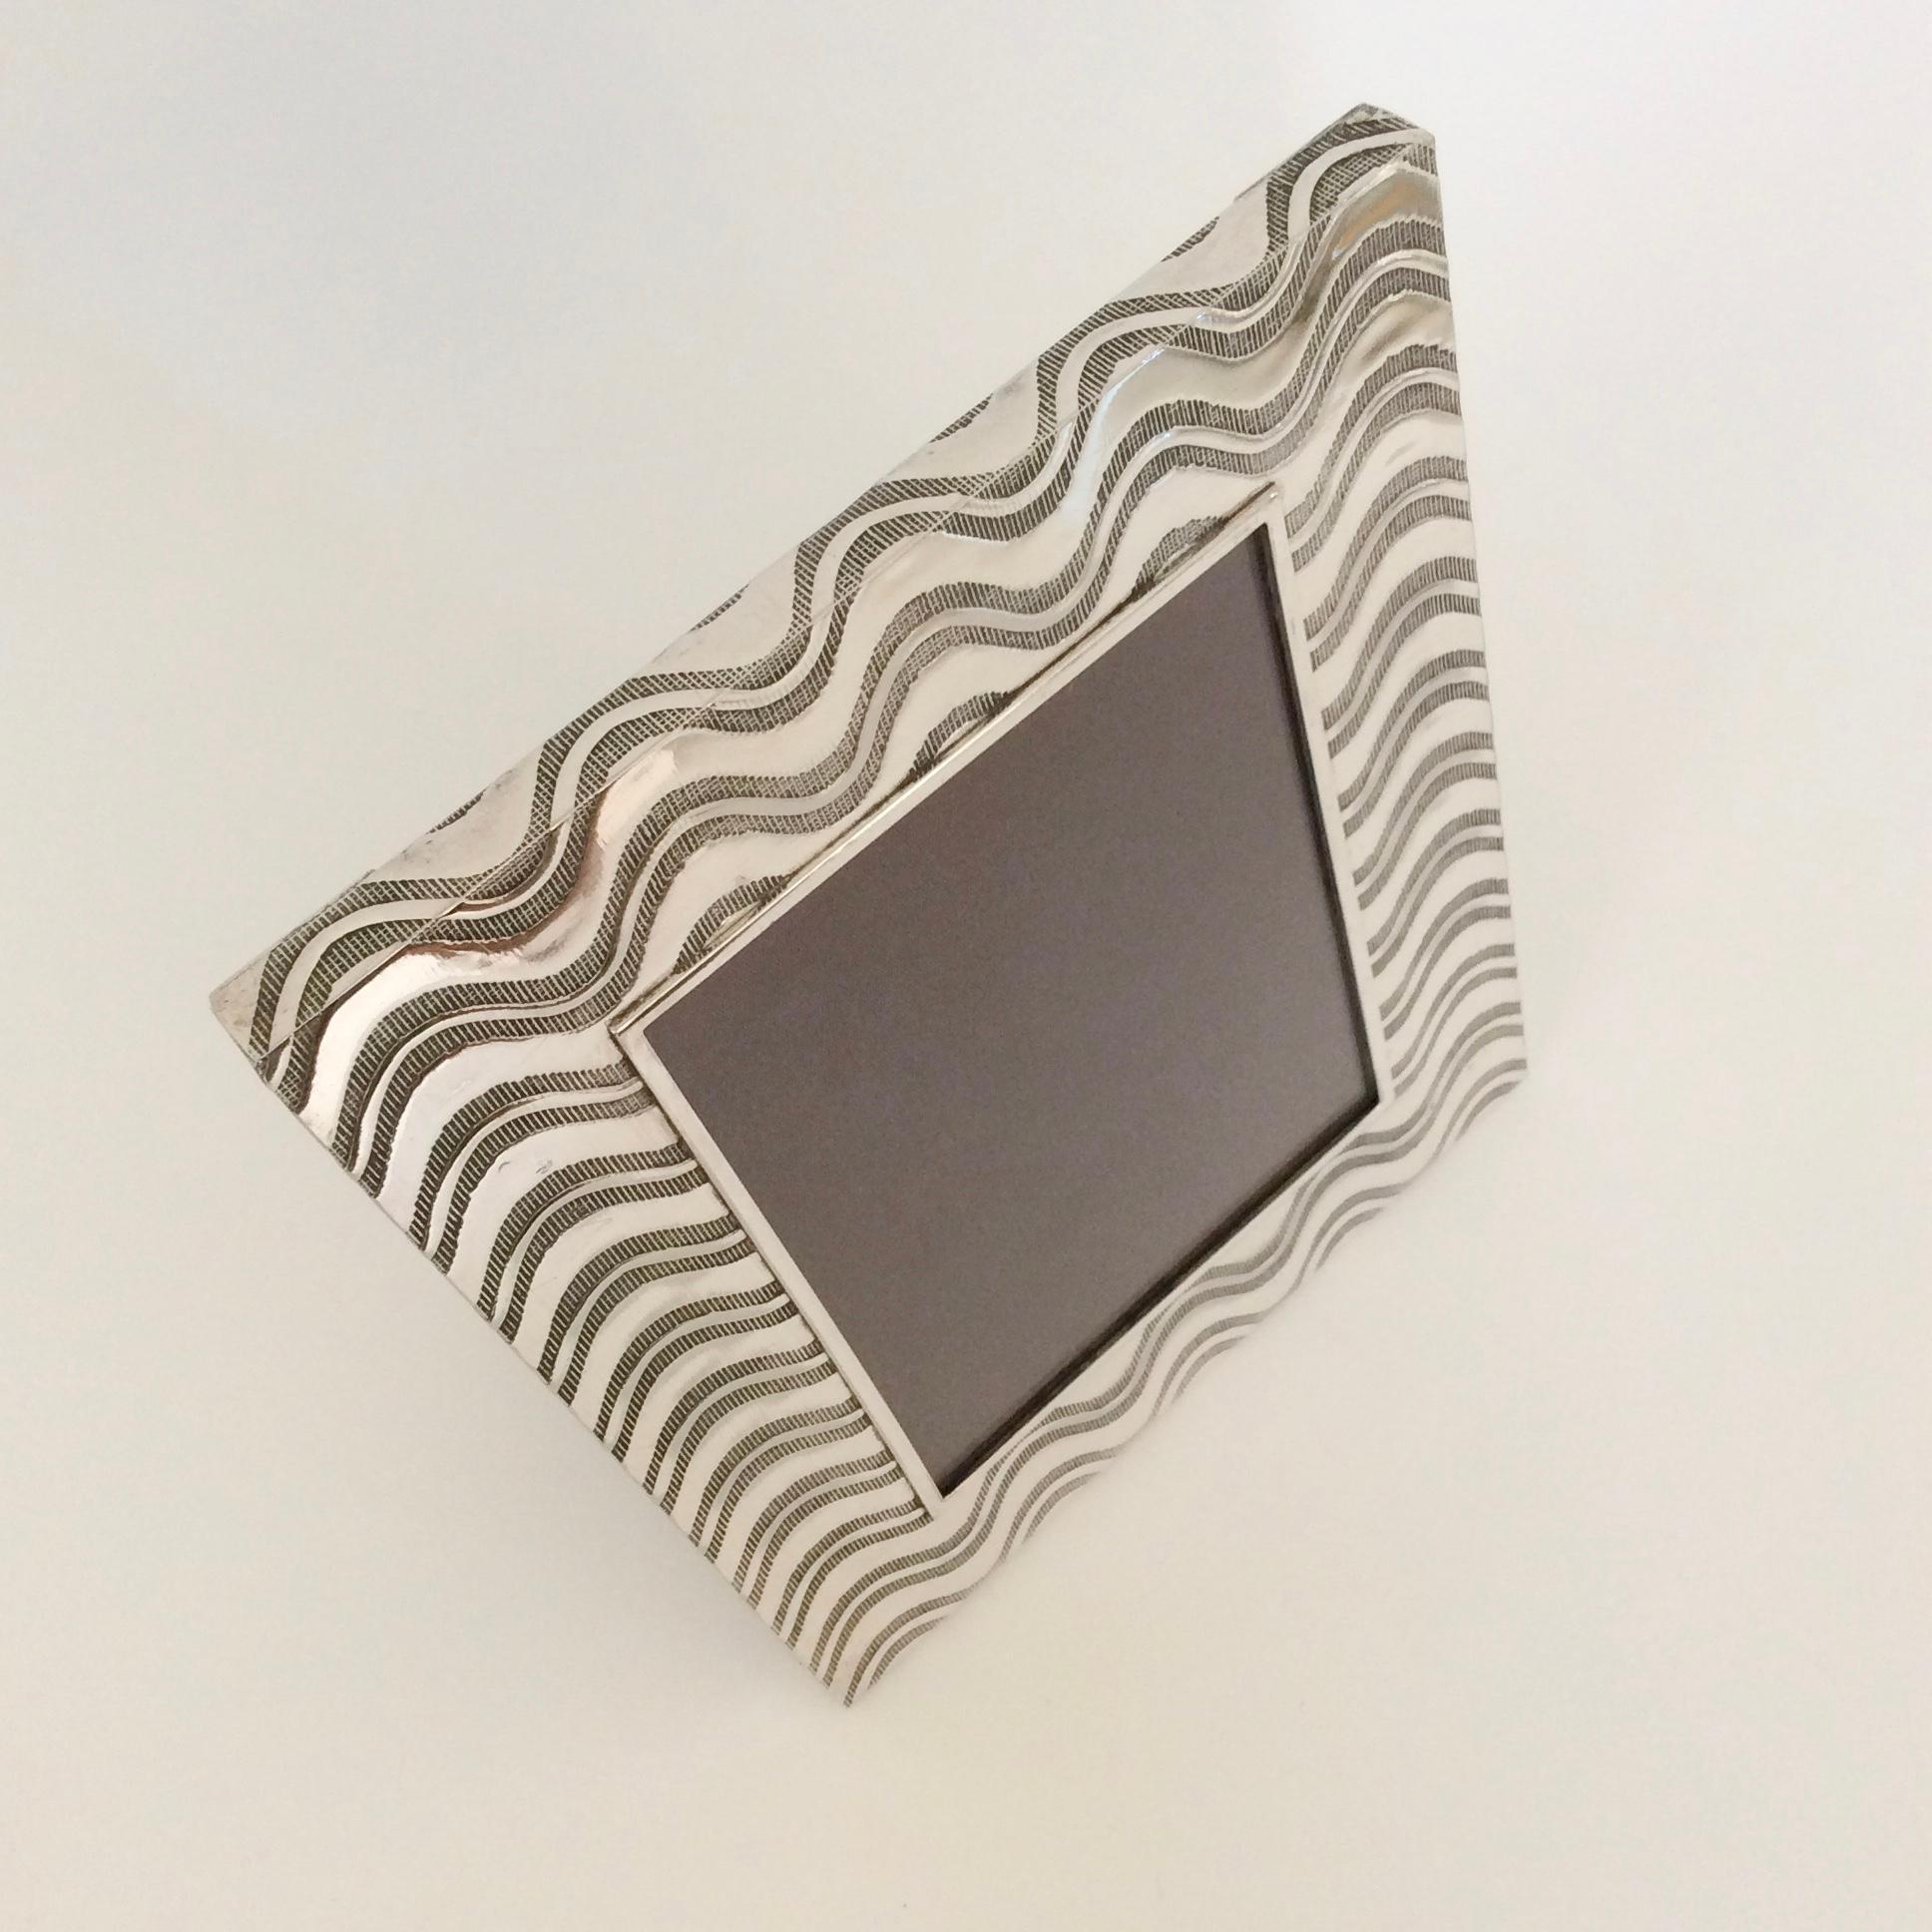 Christian Dior Silvered Metal Picture Frame, circa 1970, France (Glas)